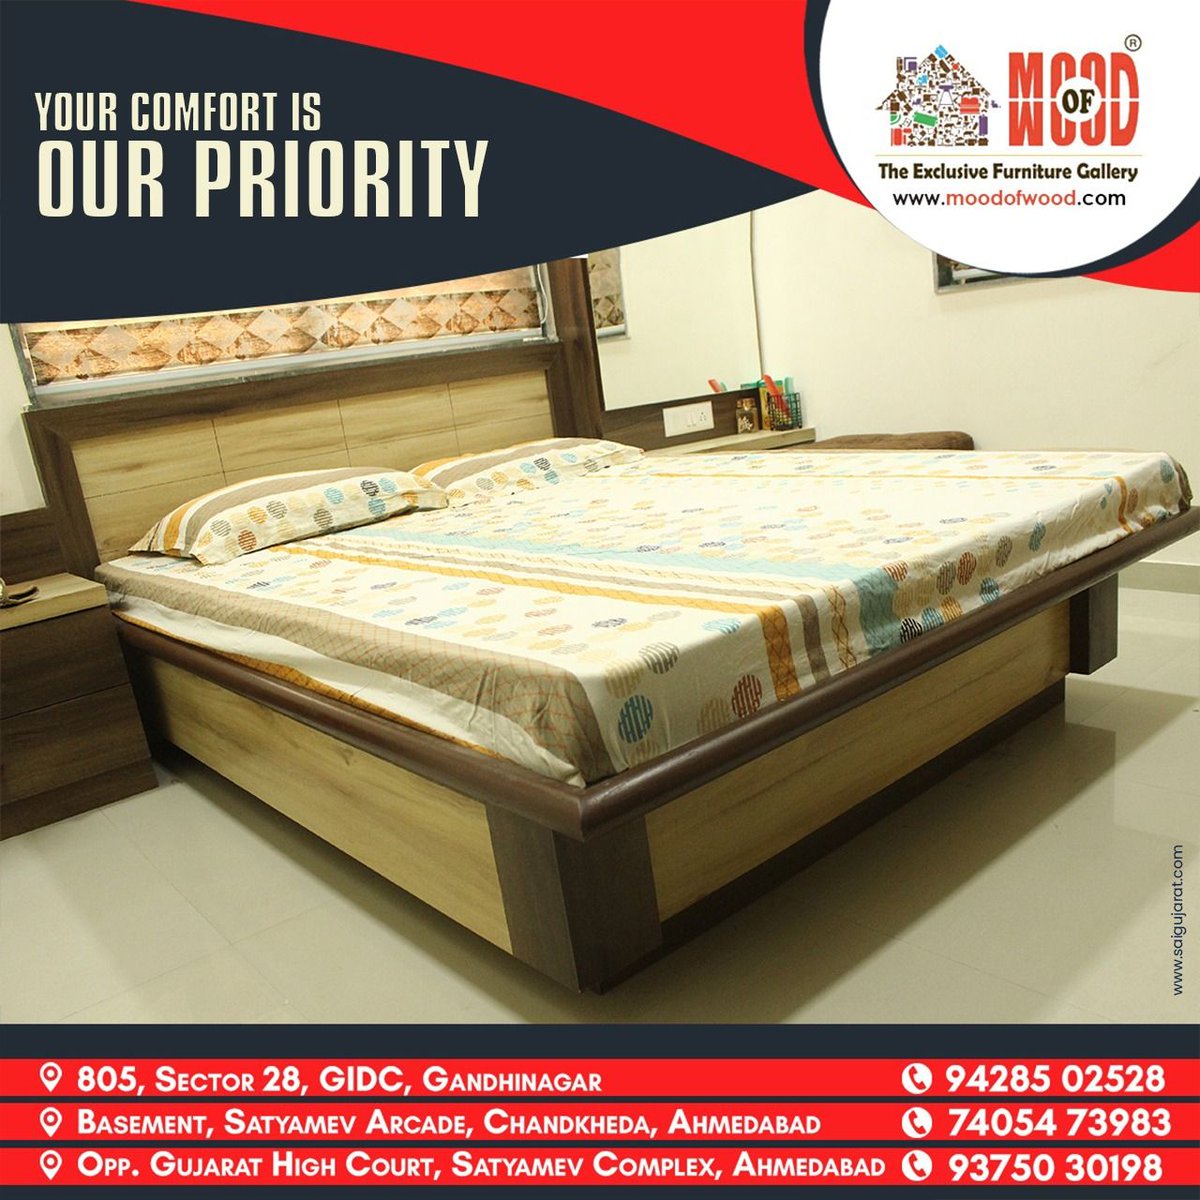 Experience the comfort with a new wave of living.
.
.
Call Us on +91-9925741418
.
.
#MoodofWood #Gandhinagar #Ahmedabad #Sola #SGHighway #BedroomFurniture #BedroomDesign #DesignerBedroom #Offer #MonsoonOffer #Furniture #FurnitureStore #FurnitureShowroom ##Showroom #interiordesign